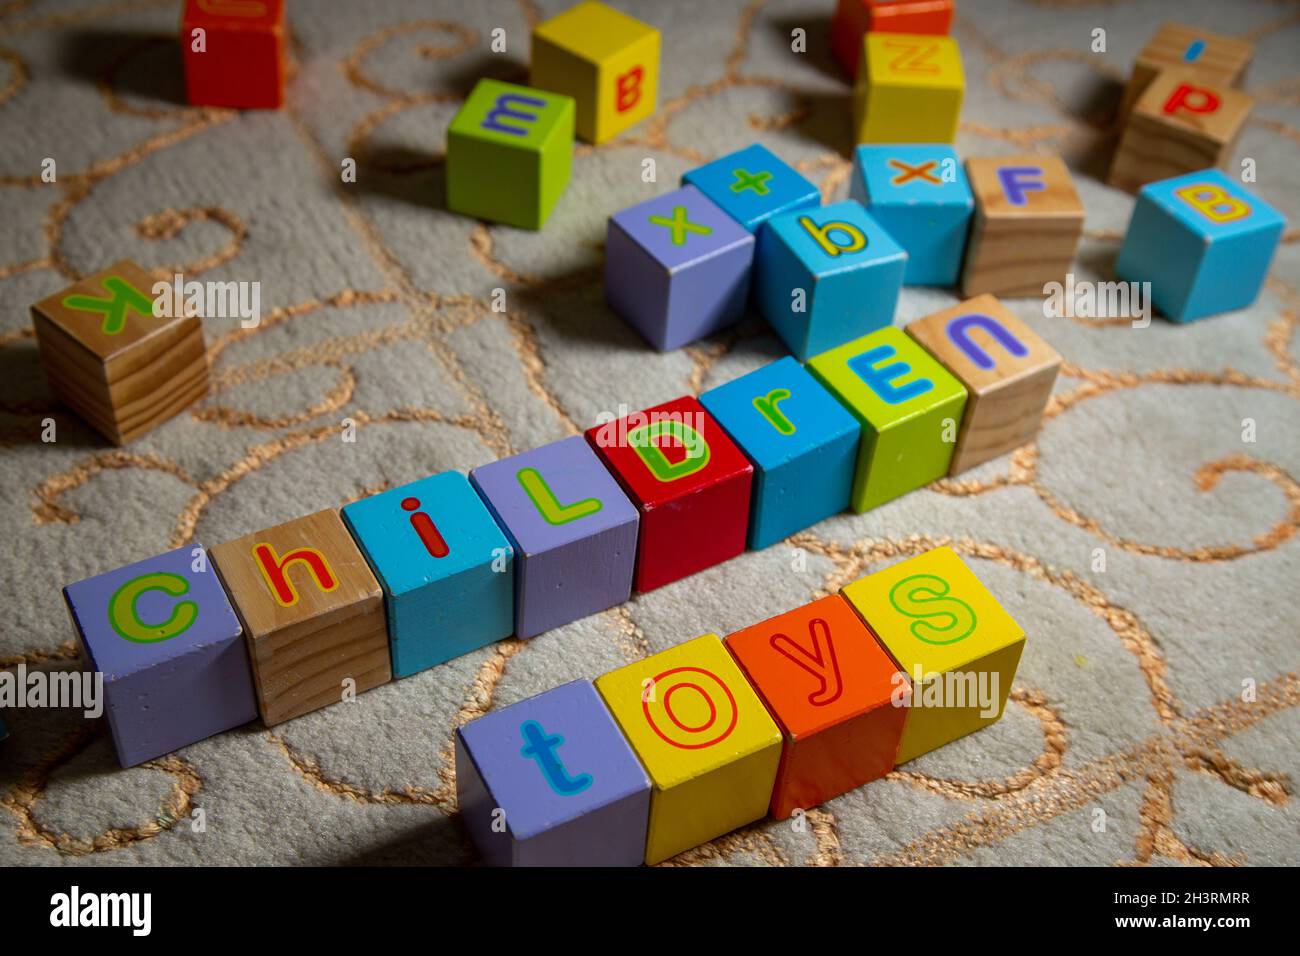 Children and toys written with colorful wooden game cubes. Children toys. Stock Photo